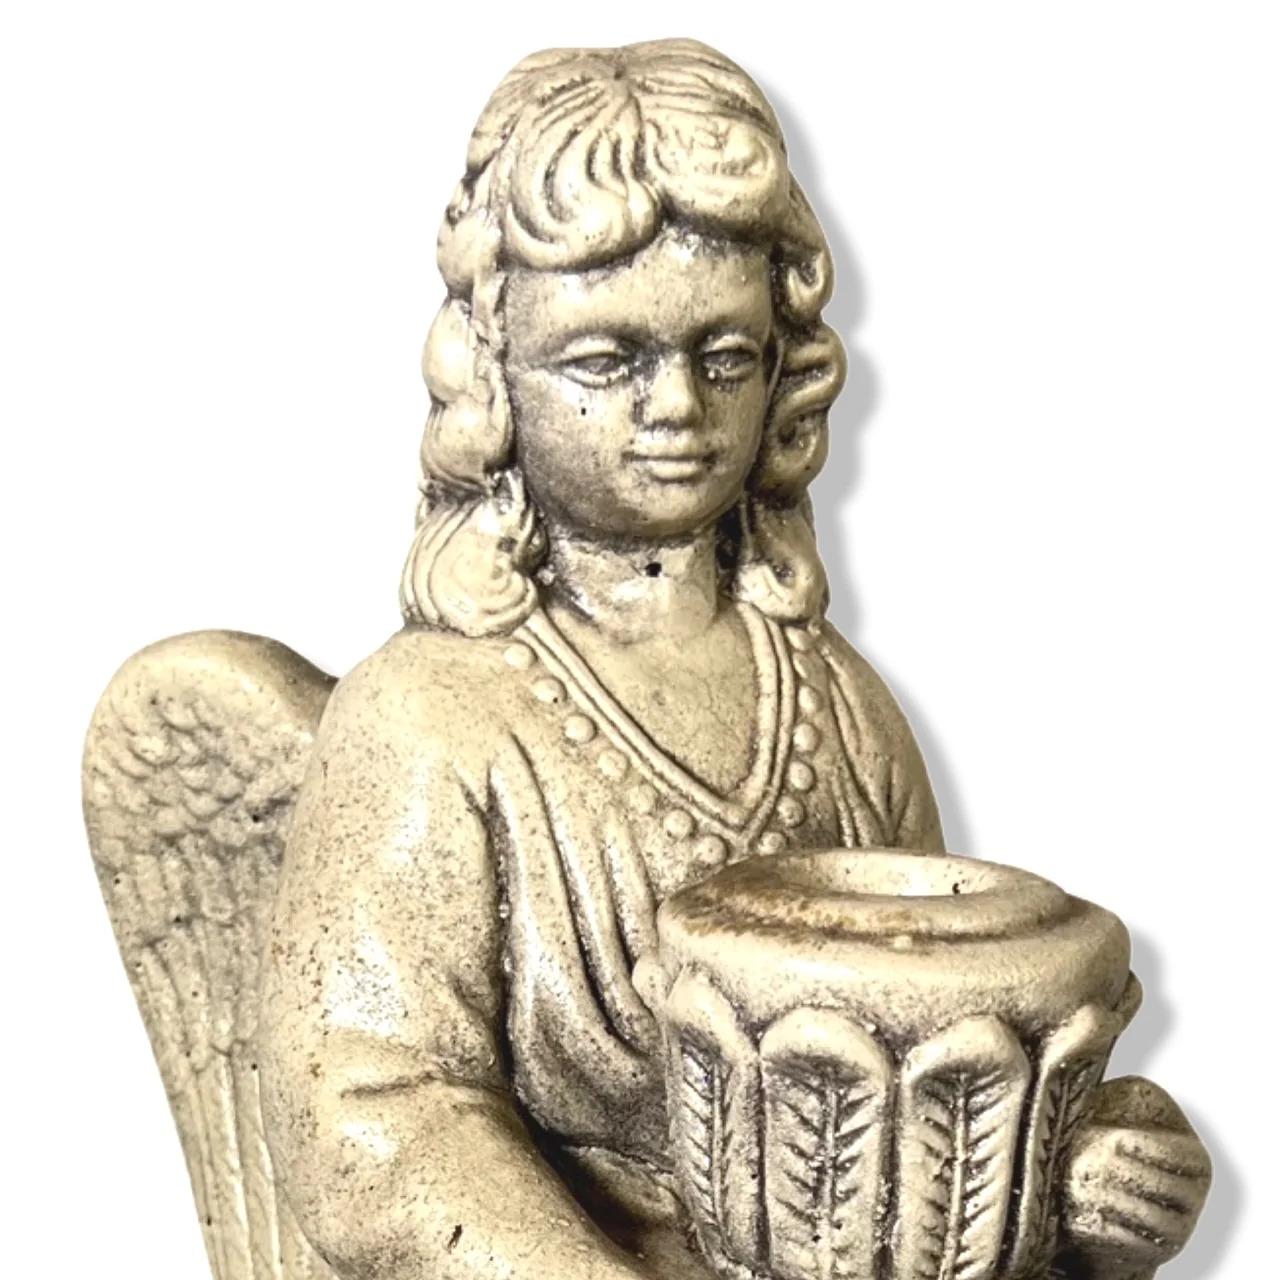 This petit Angel stone and cement cast statue can be used in multiple ways. Firstly, as a quaint garden statue on its own, or in the interior of your home as a candle holder. The angel herself, is holding a candle holder which is the perfect size